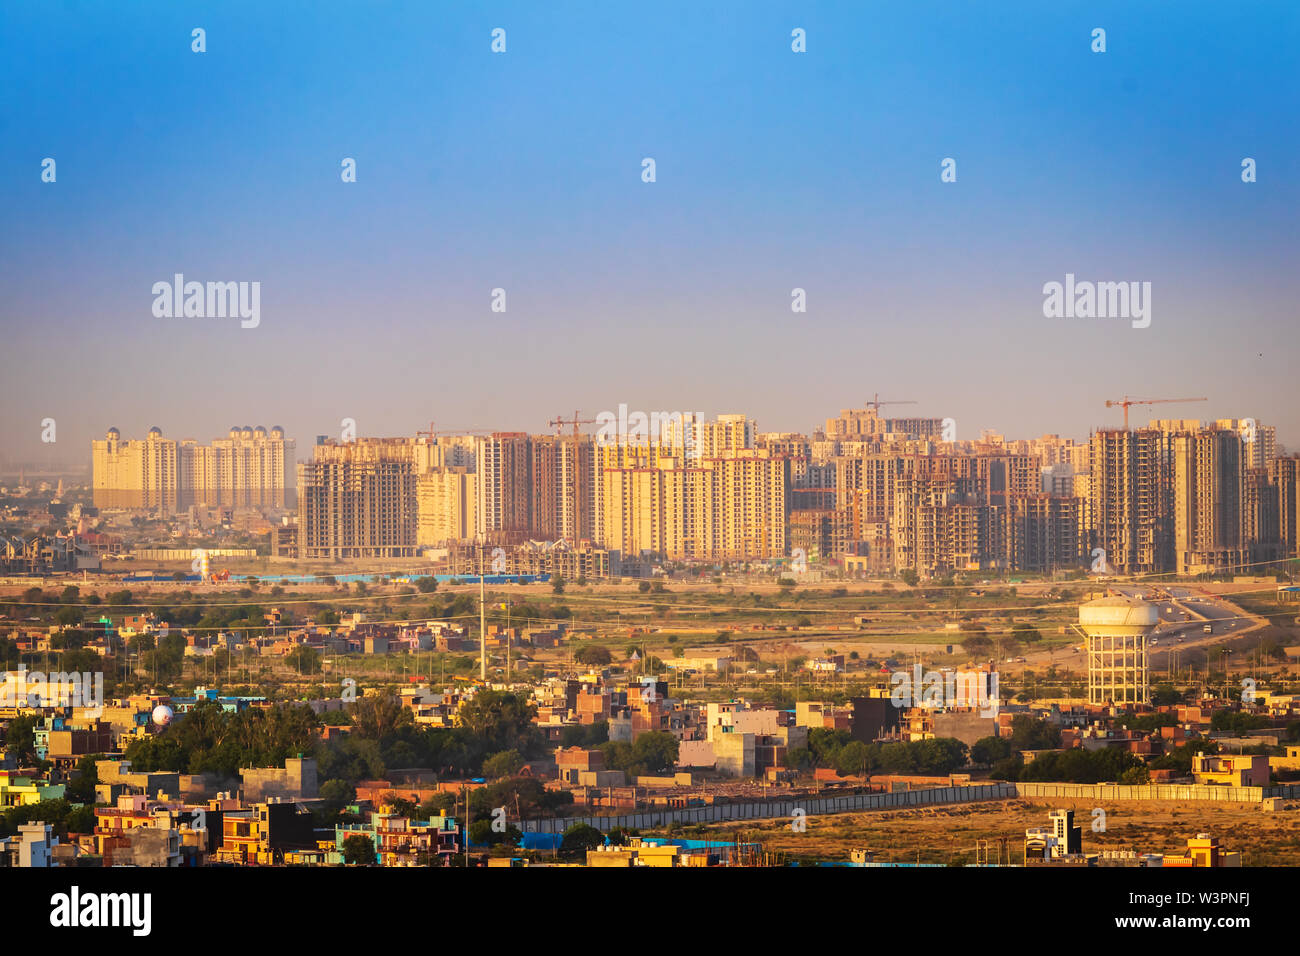 cityscape of high rise buildings for real estate projects . some buildings under construction Stock Photo